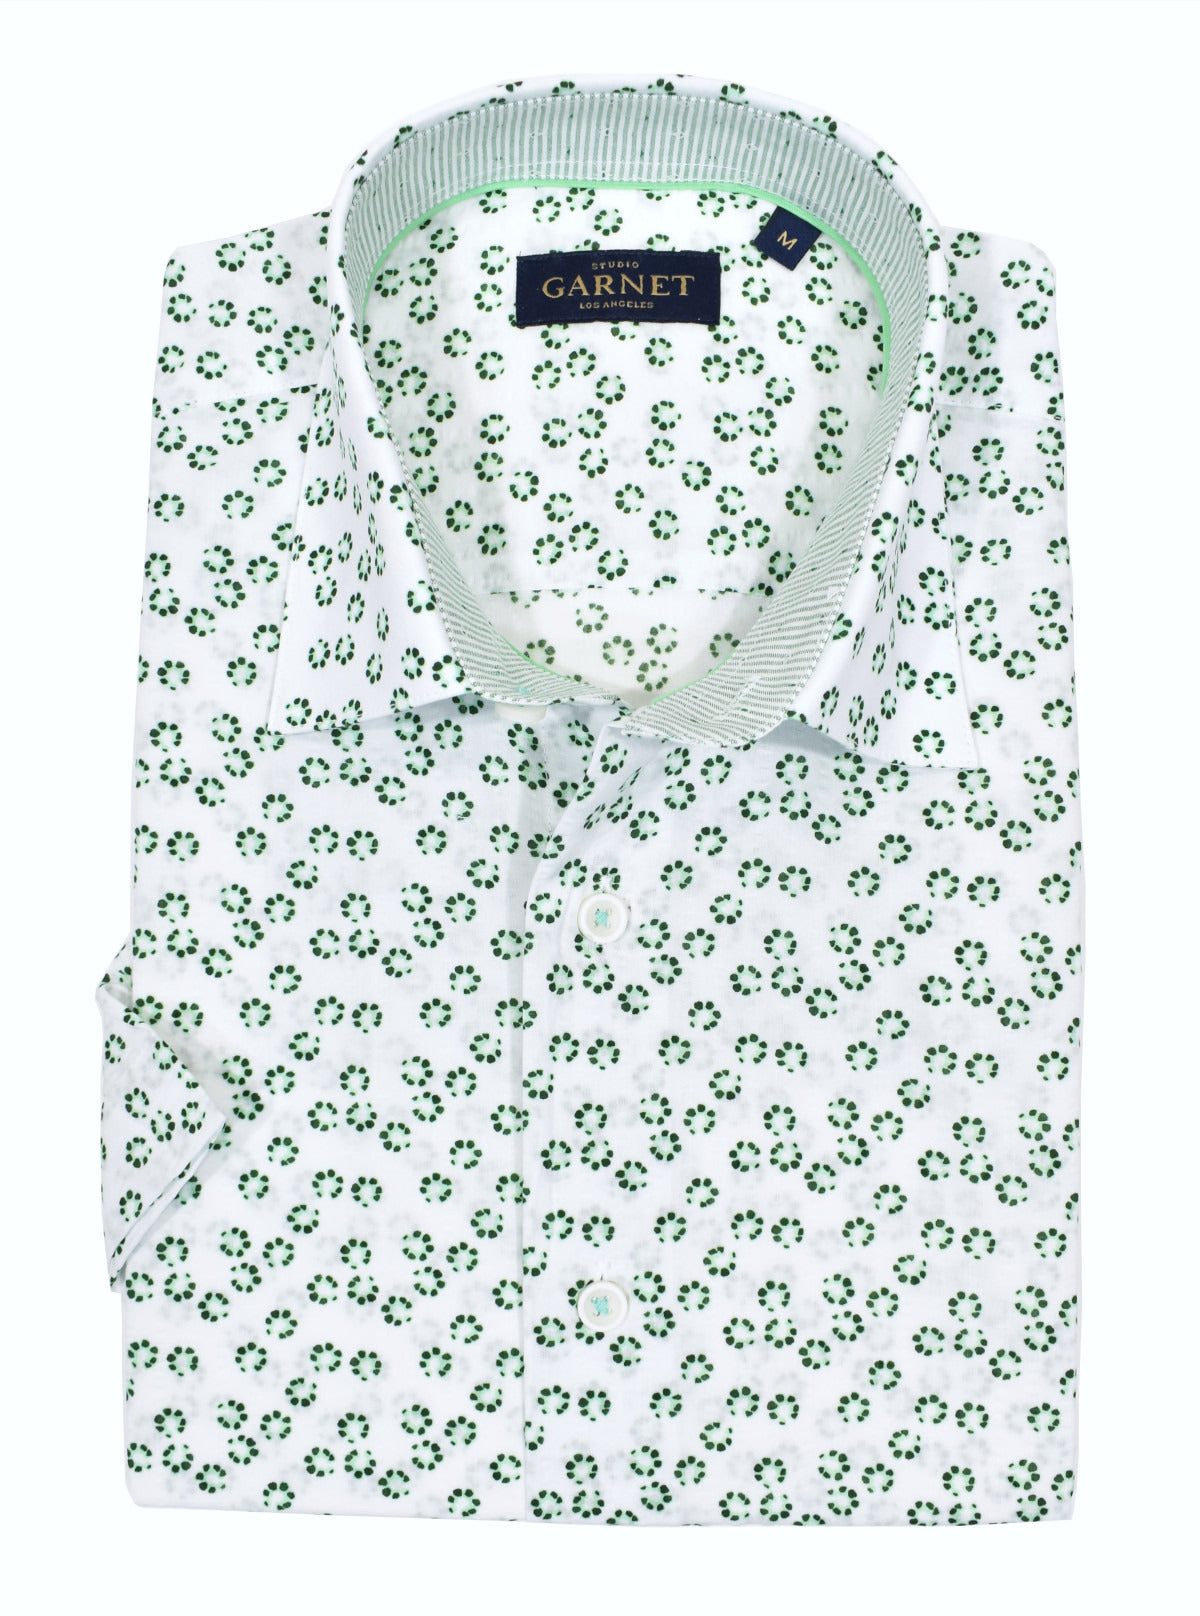 Cotton fabric with a seersucker finish sporting a random petal pattern that gives off a contemporary sporty feel.  Soft washed, contrast trim fabric and matched buttons add to the look.  Classic shaped fit.